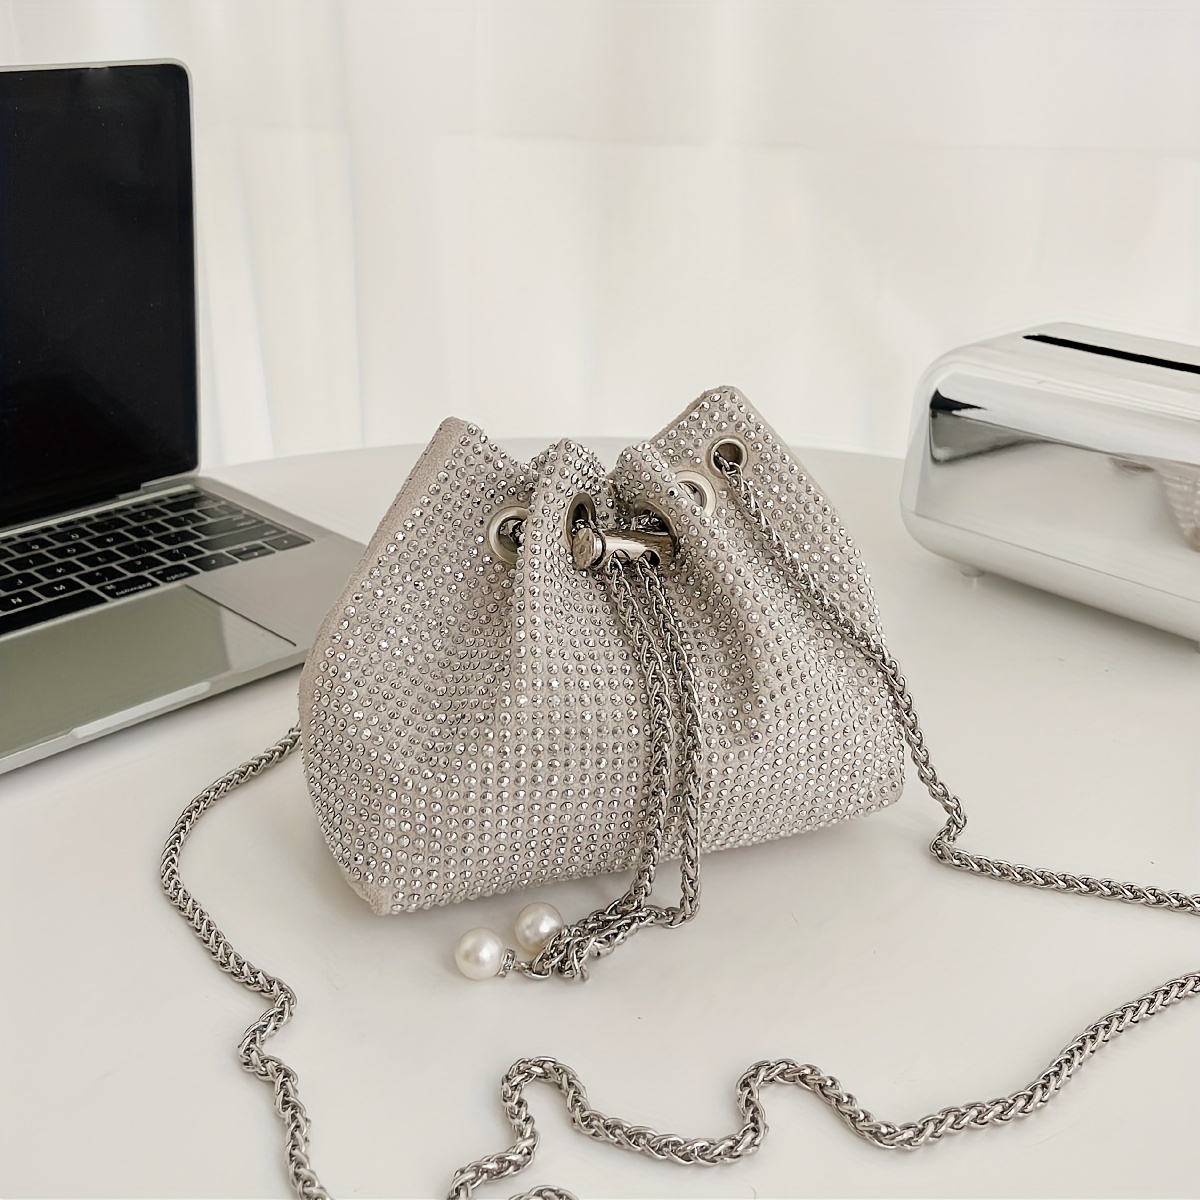 Elegant Drawstring Bucket Bag Womens Trendy Faux Leather Chain Shoulder Bag, Free Shipping For New Users